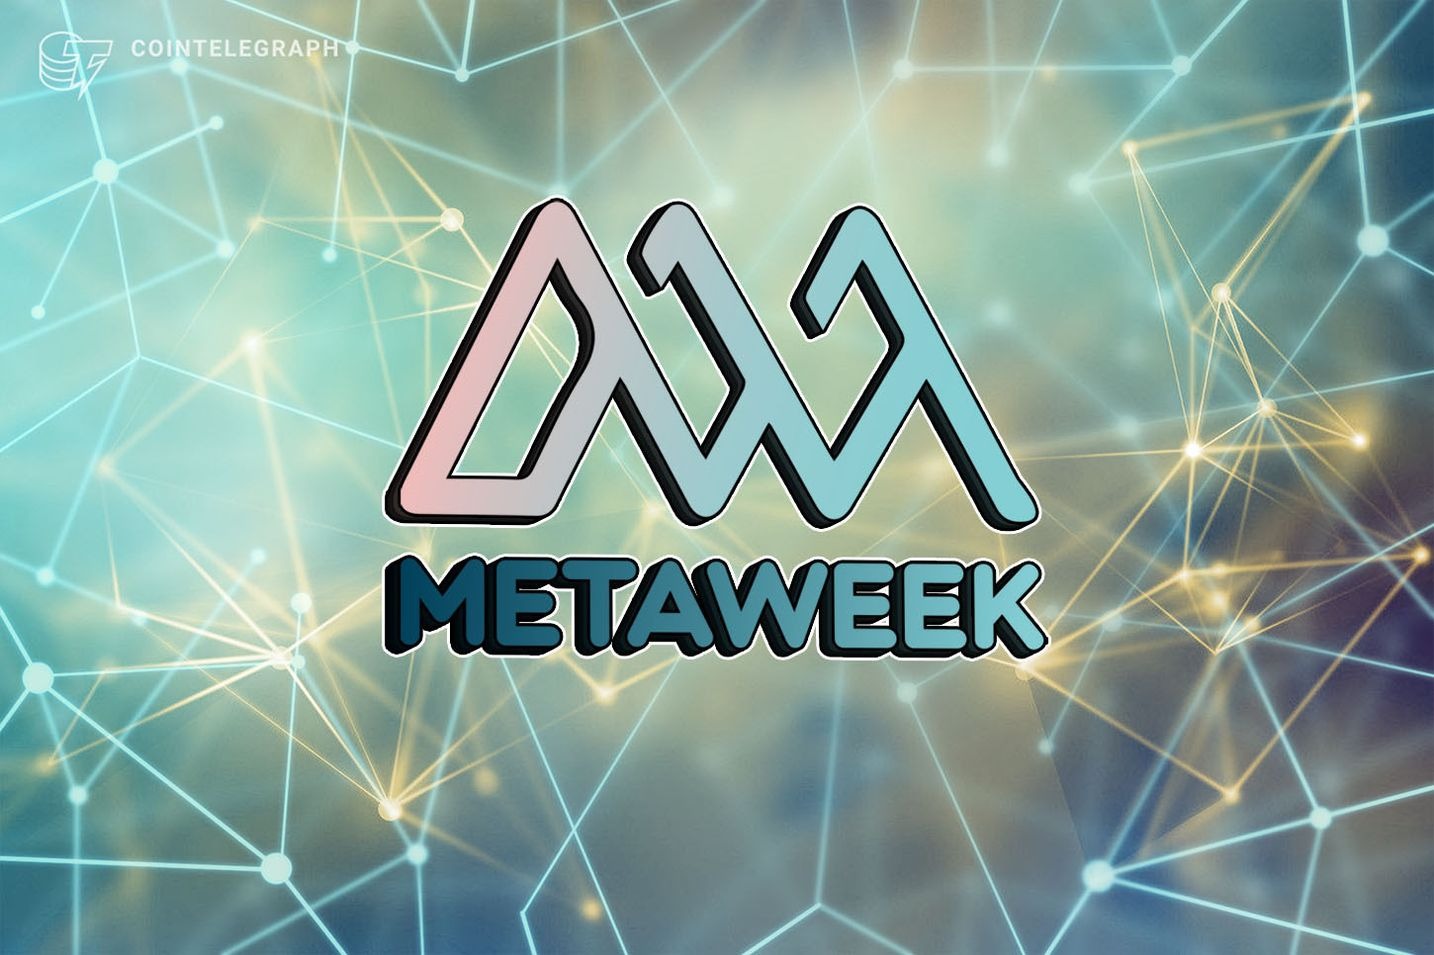 Ecoolska is partnering with the MetaWeek 2022 `
and is visiting Dubai September 7th-14th